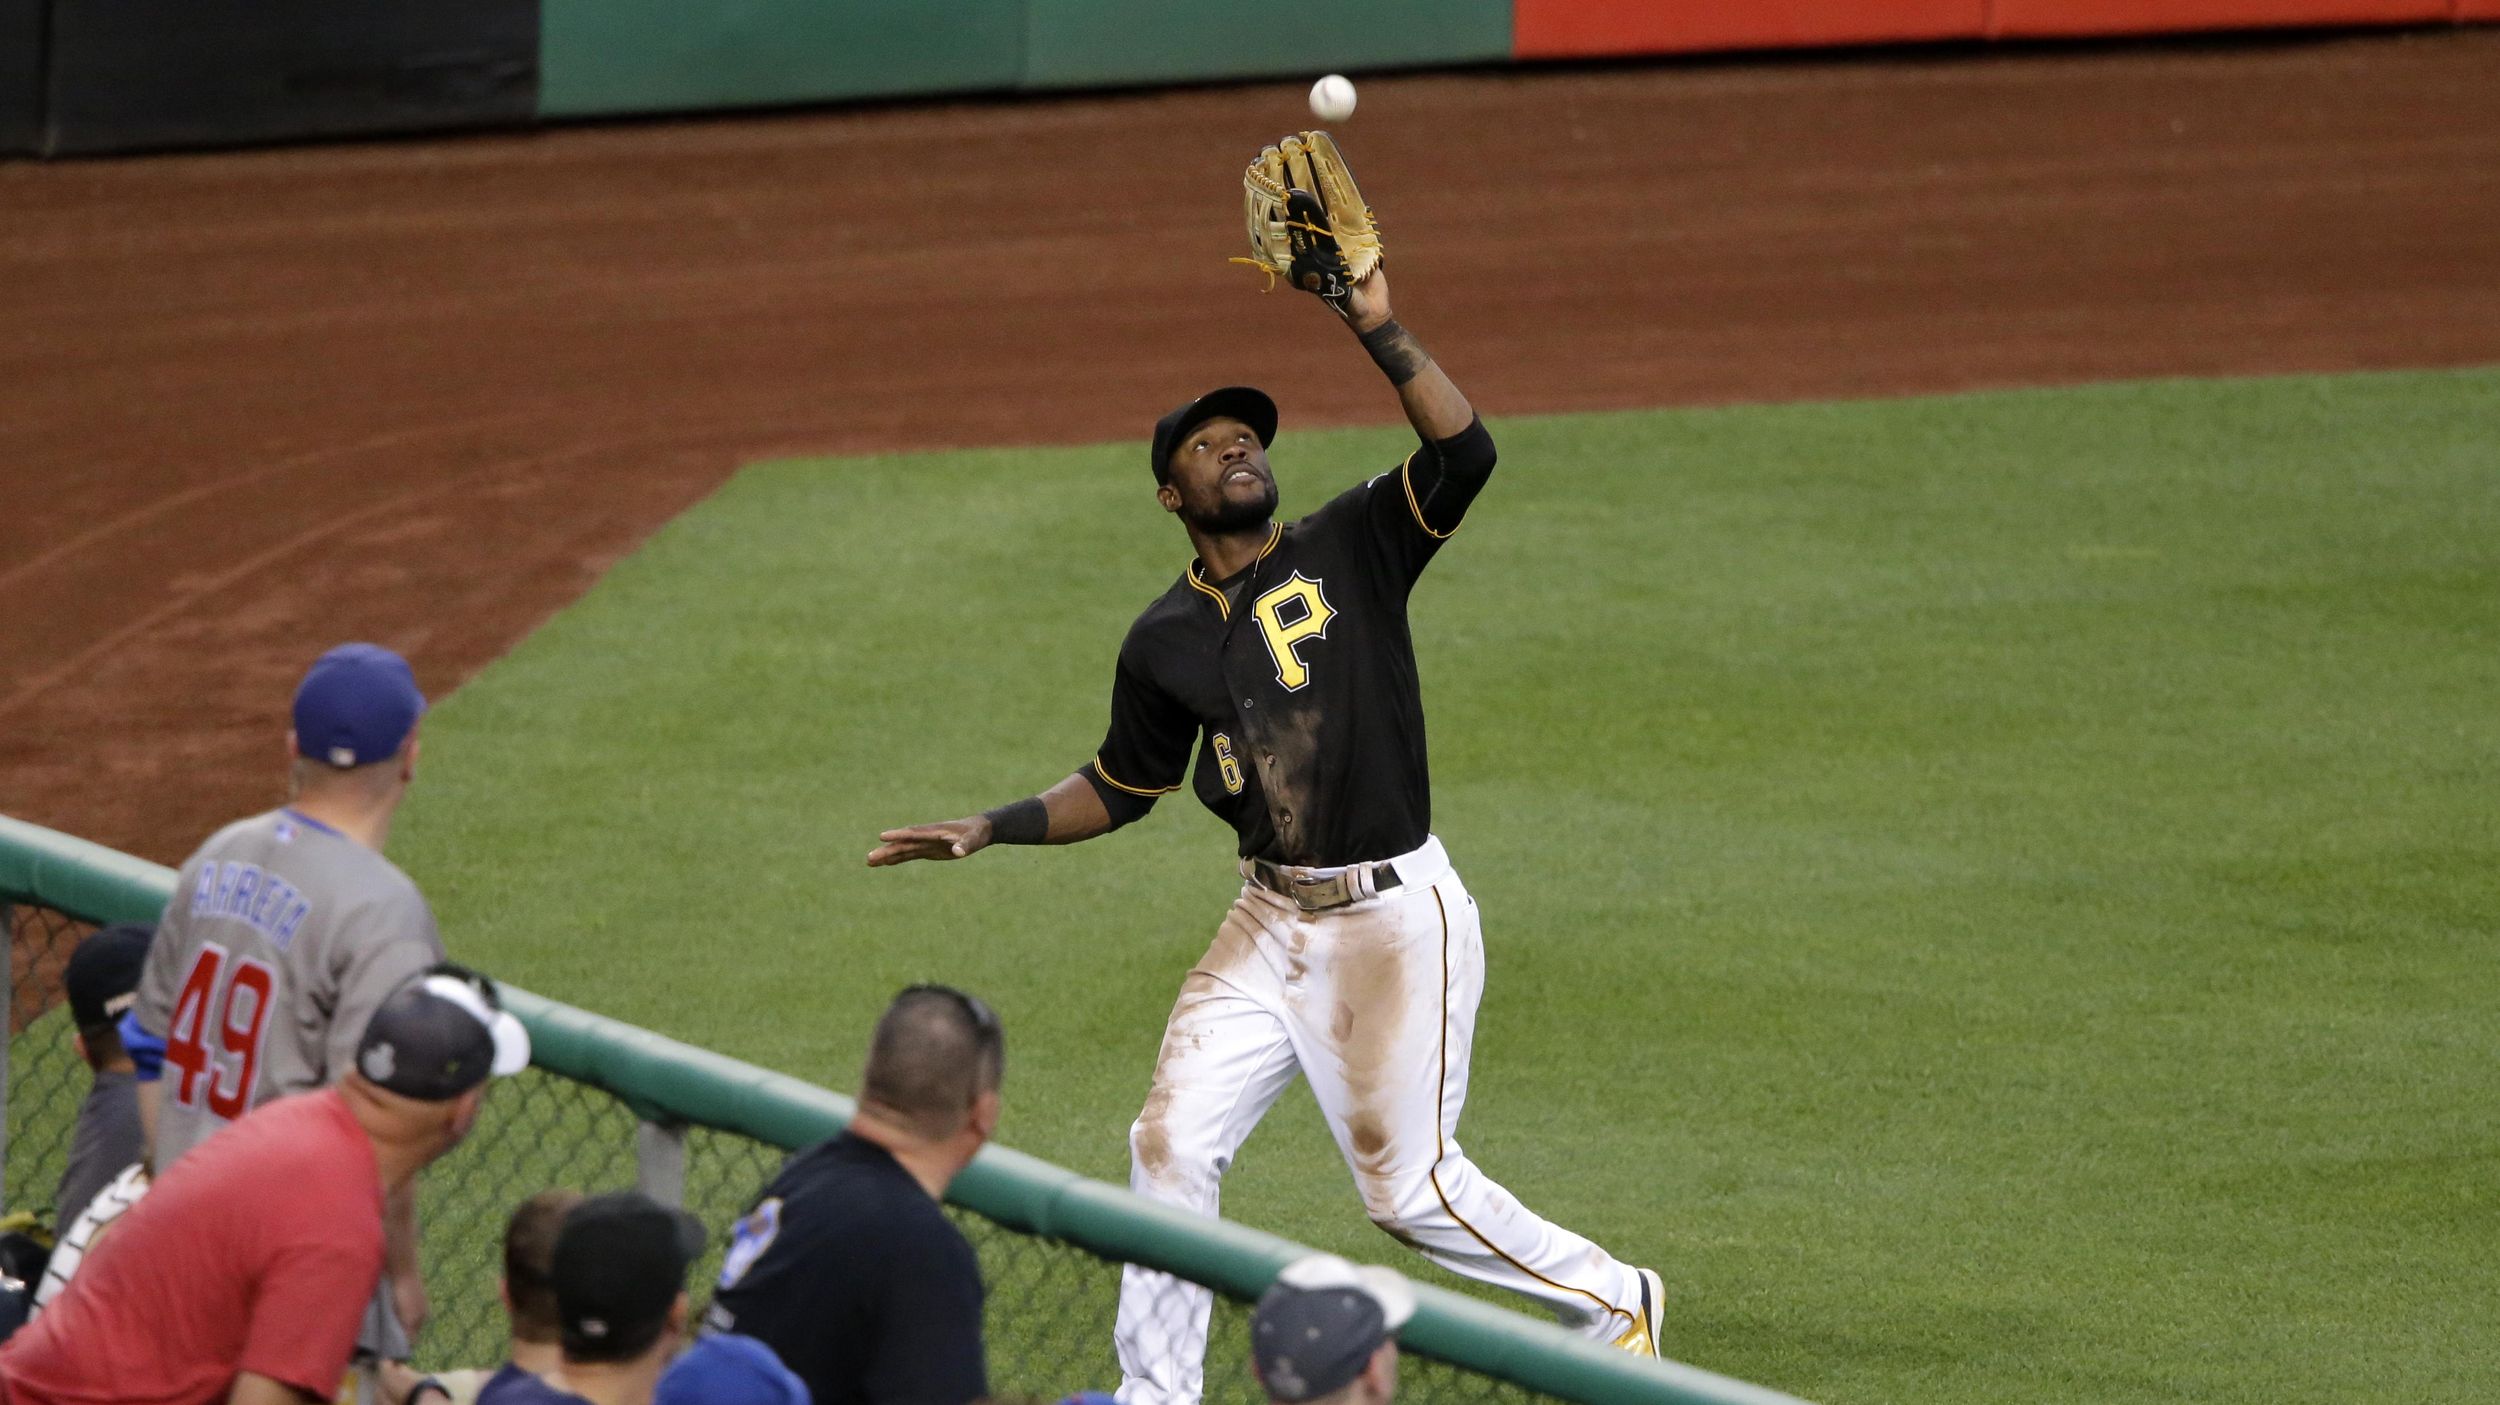 Pirates' Marte is a Star(ling), but is he as good as McCutchen